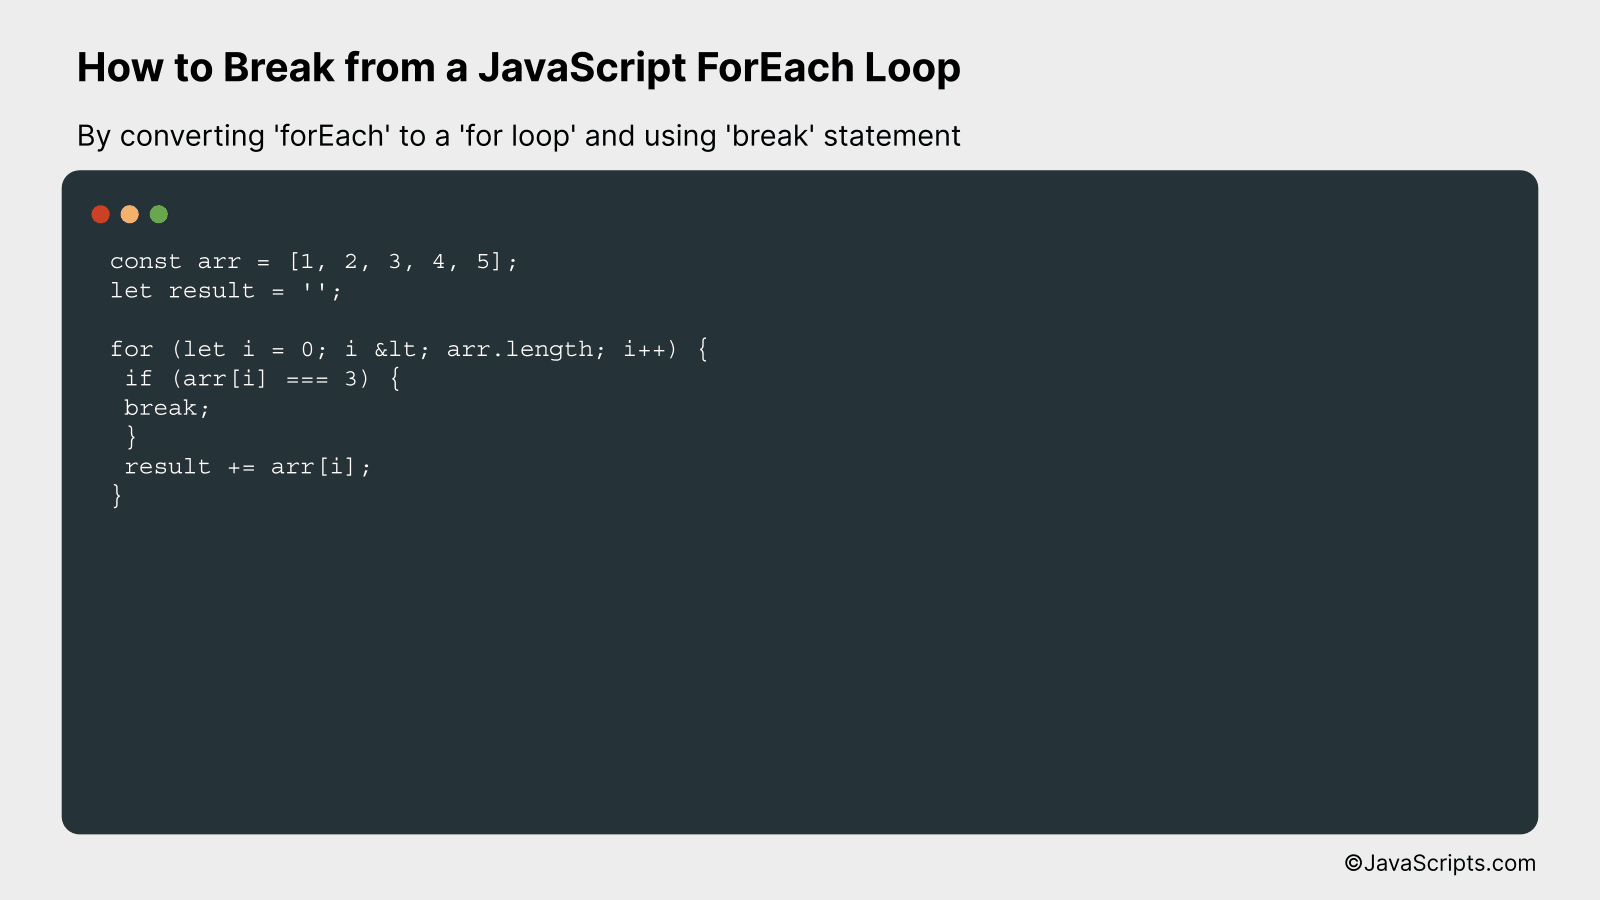 By converting 'forEach' to a 'for loop' and using 'break' statement